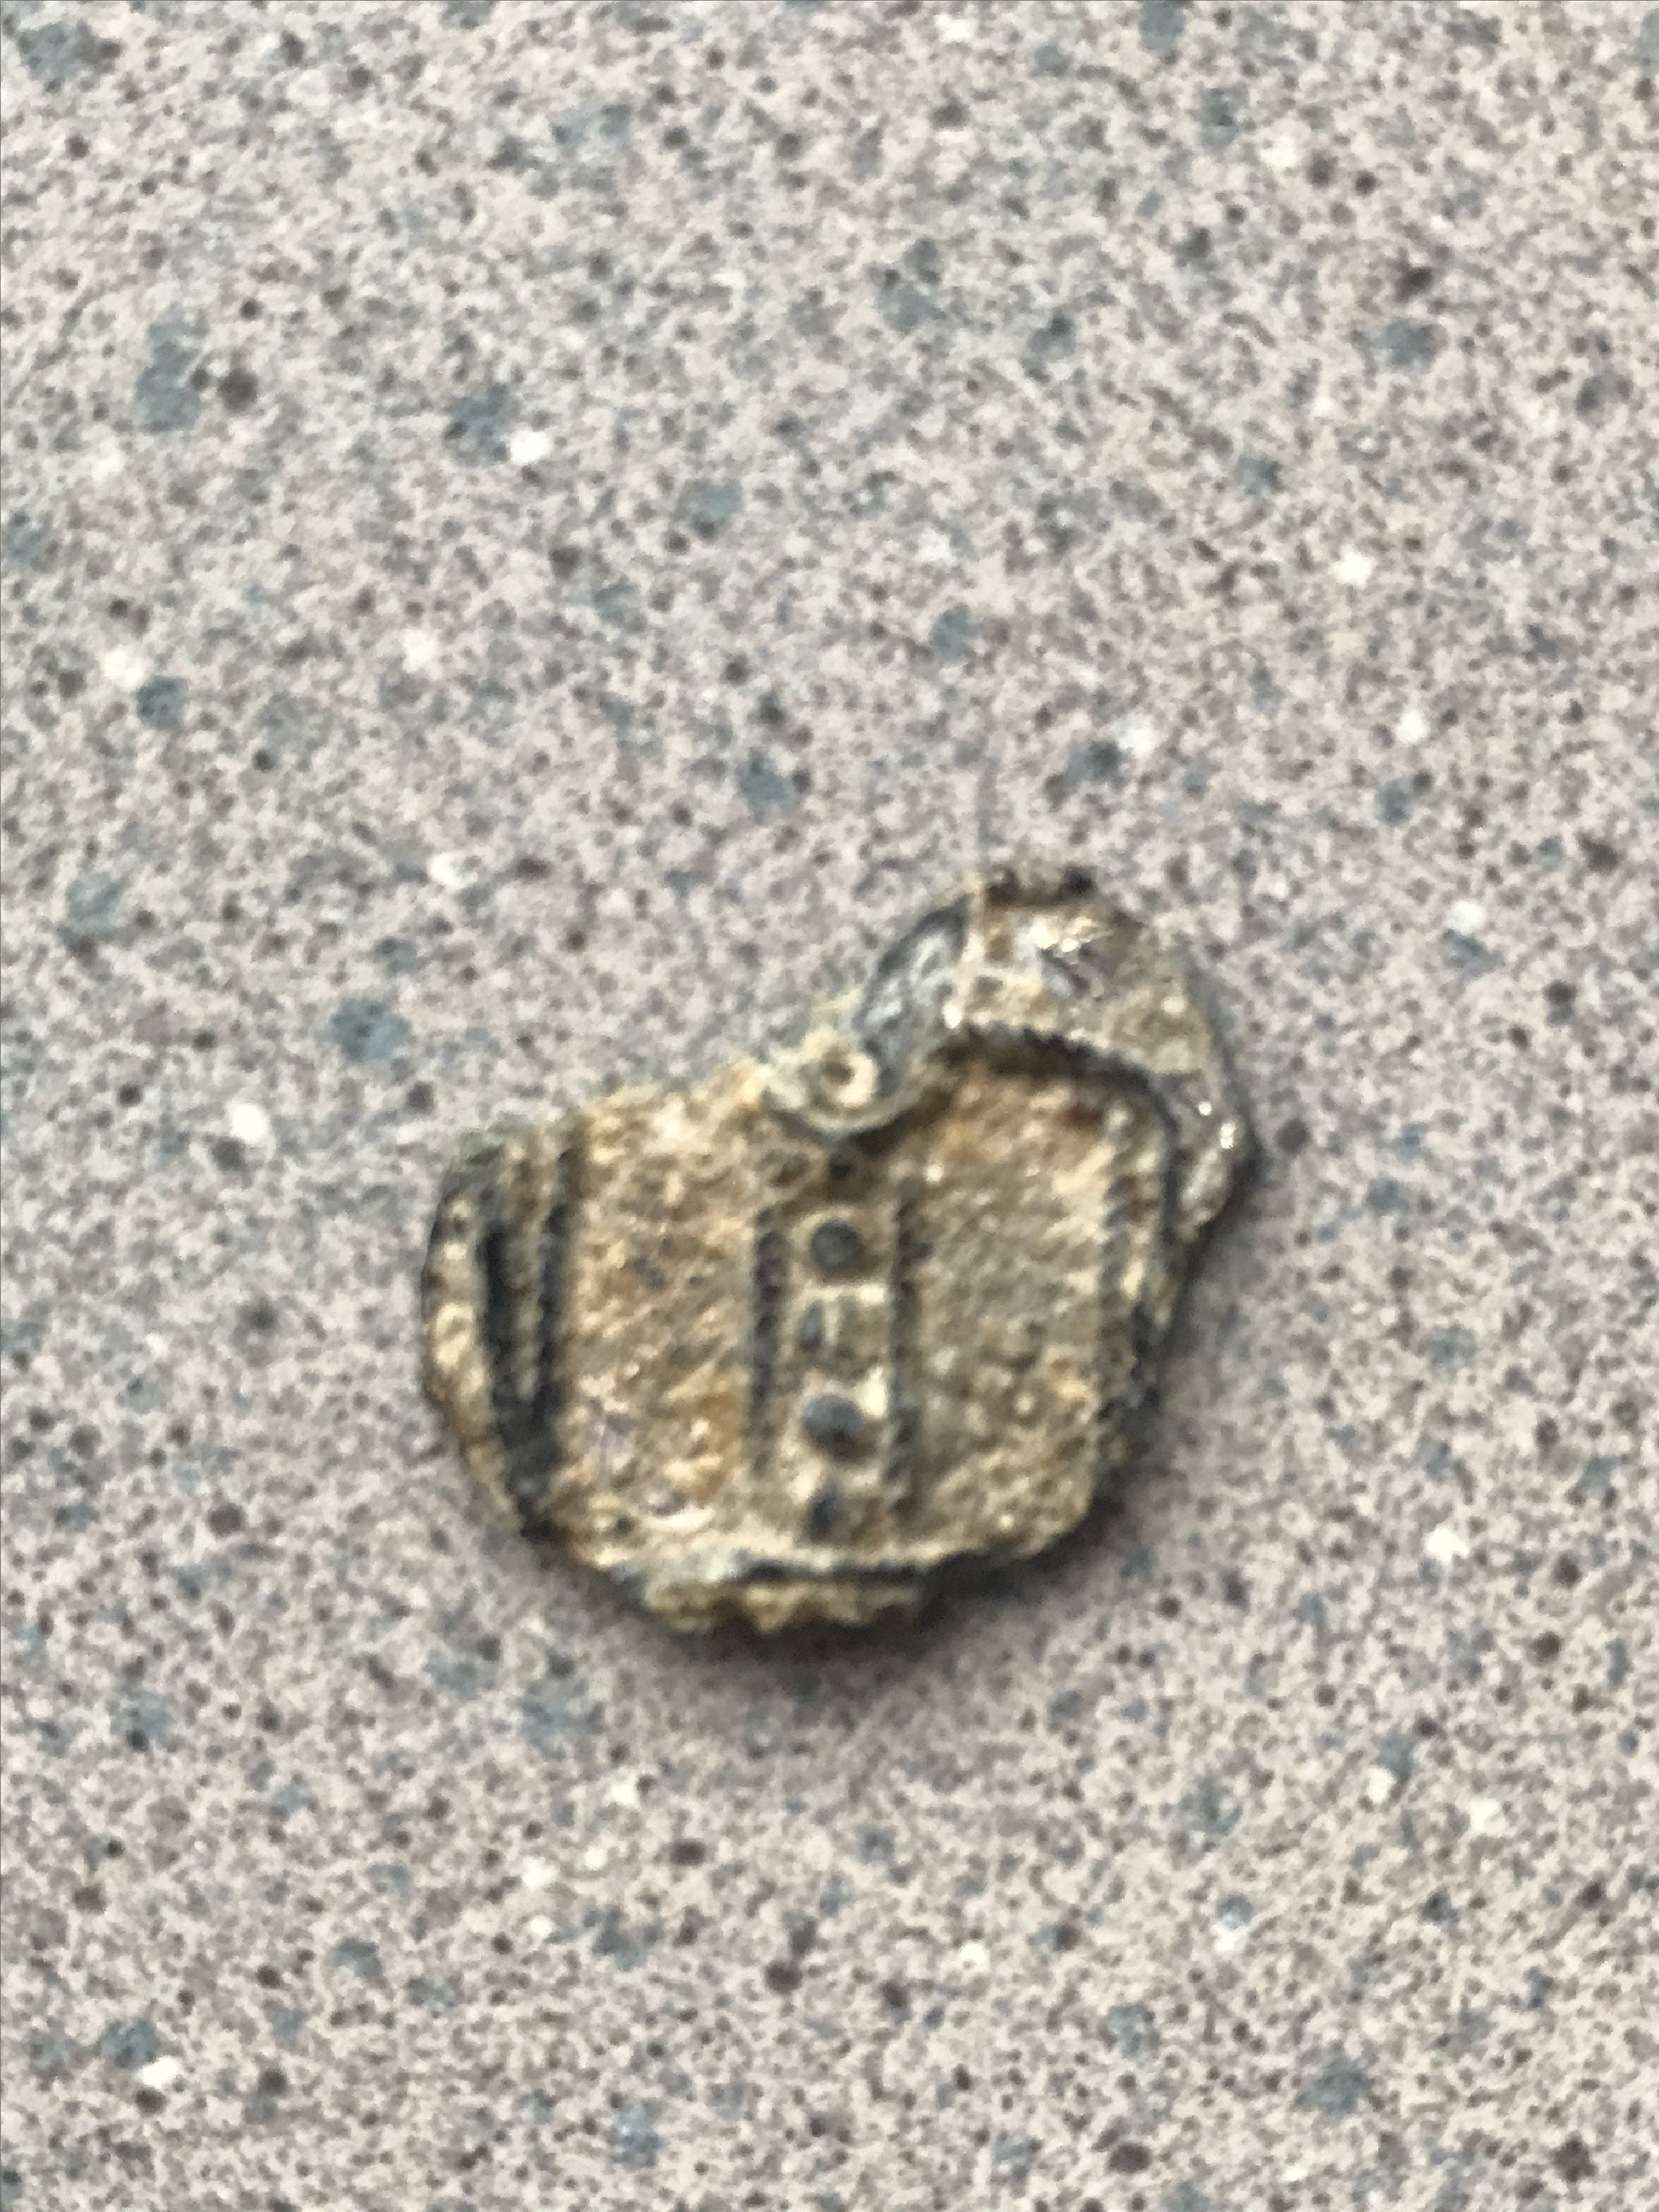 Mystery find coin badge?